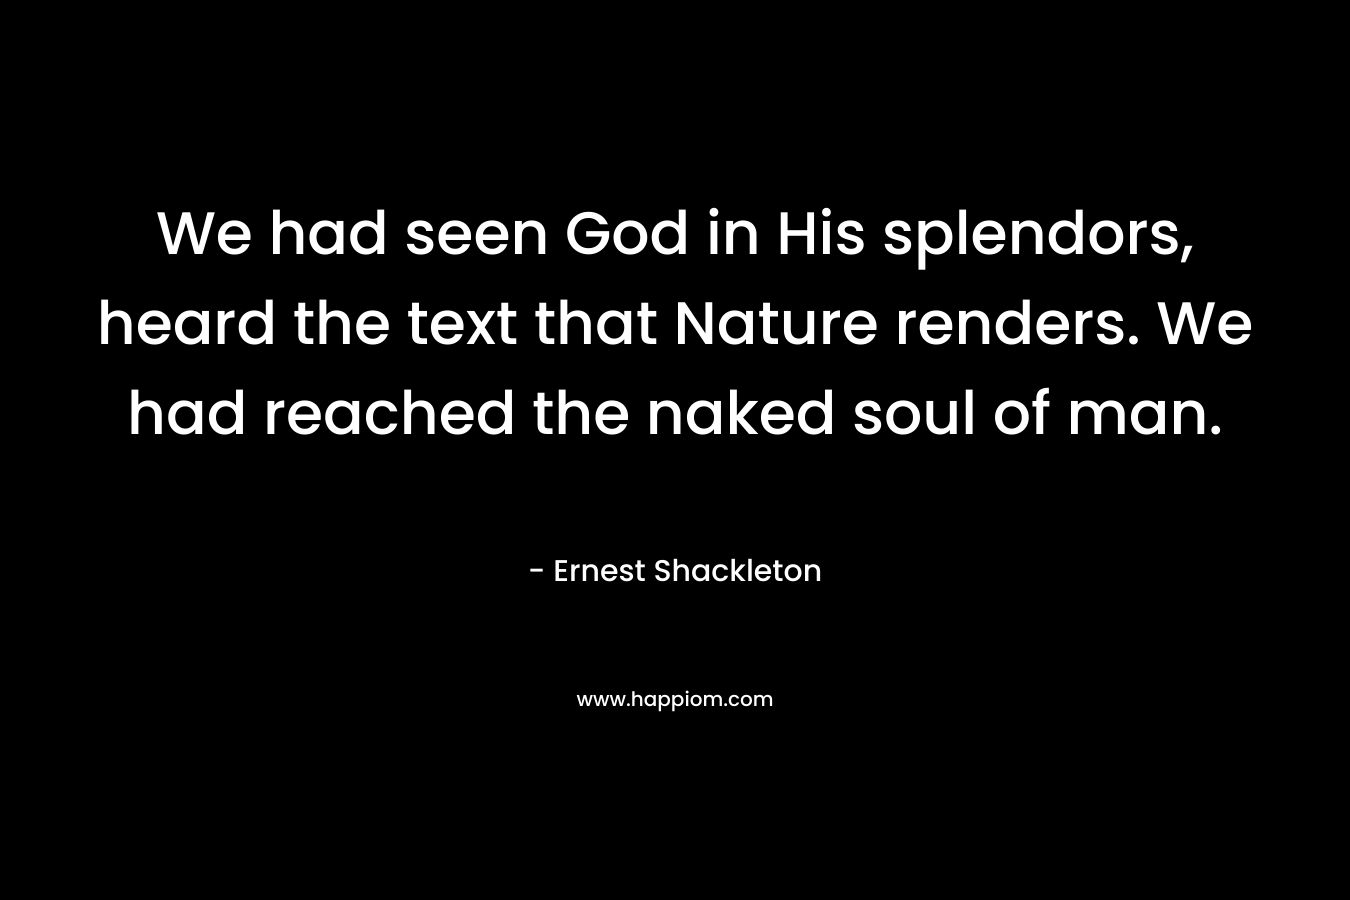 We had seen God in His splendors, heard the text that Nature renders. We had reached the naked soul of man. – Ernest Shackleton